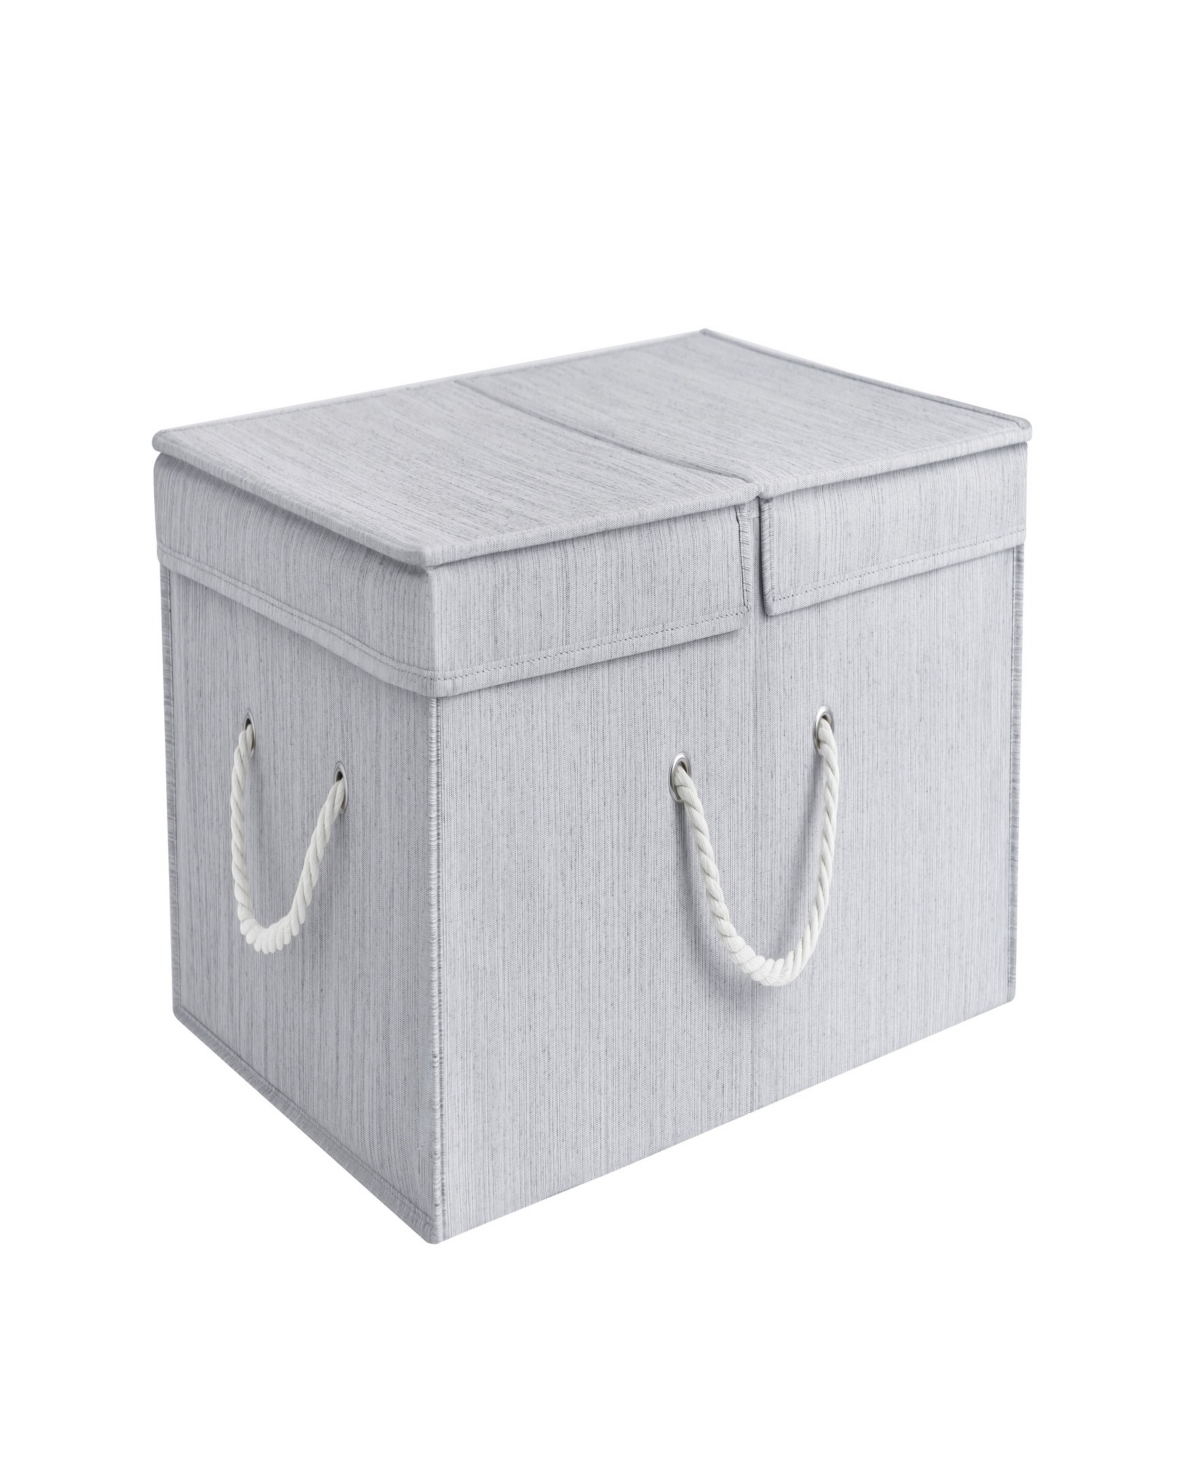 Wethinkstorage 65 Litre Collapsible Fabric Storage Bin With Double-open Lid And Cotton Rope Handles In Gray